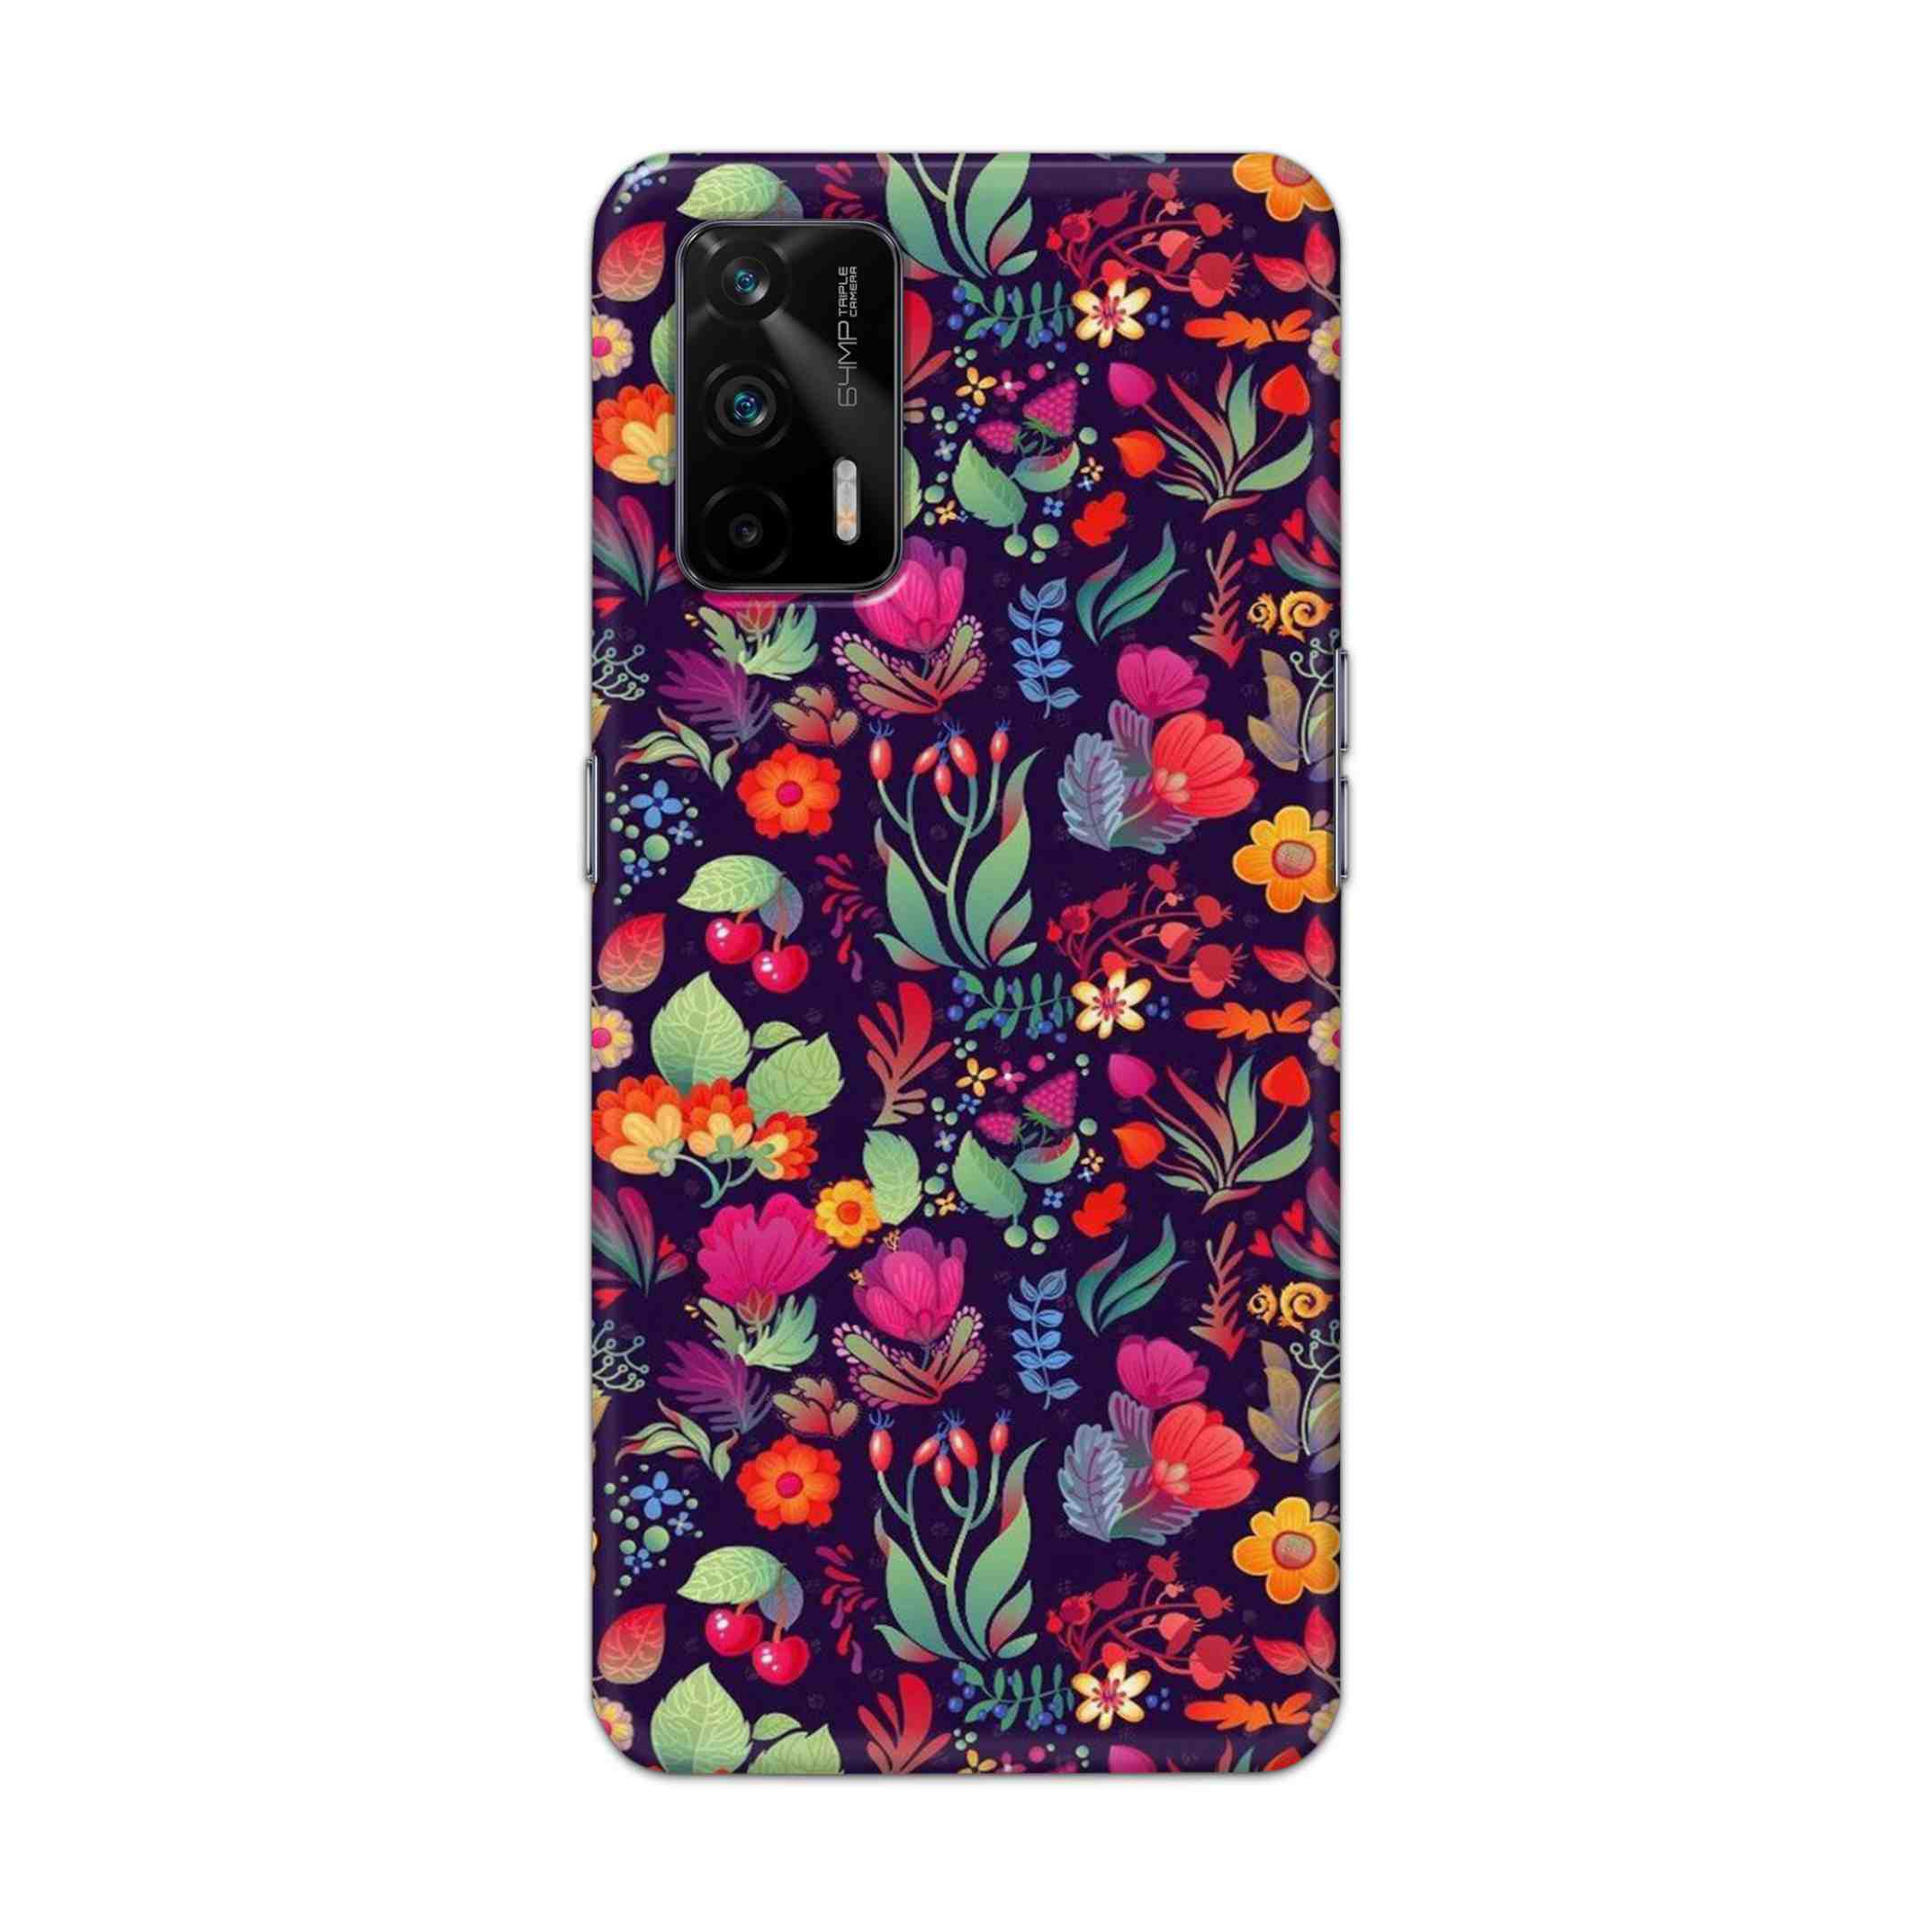 Buy Fruits Flower Hard Back Mobile Phone Case Cover For Realme X7 Max Online